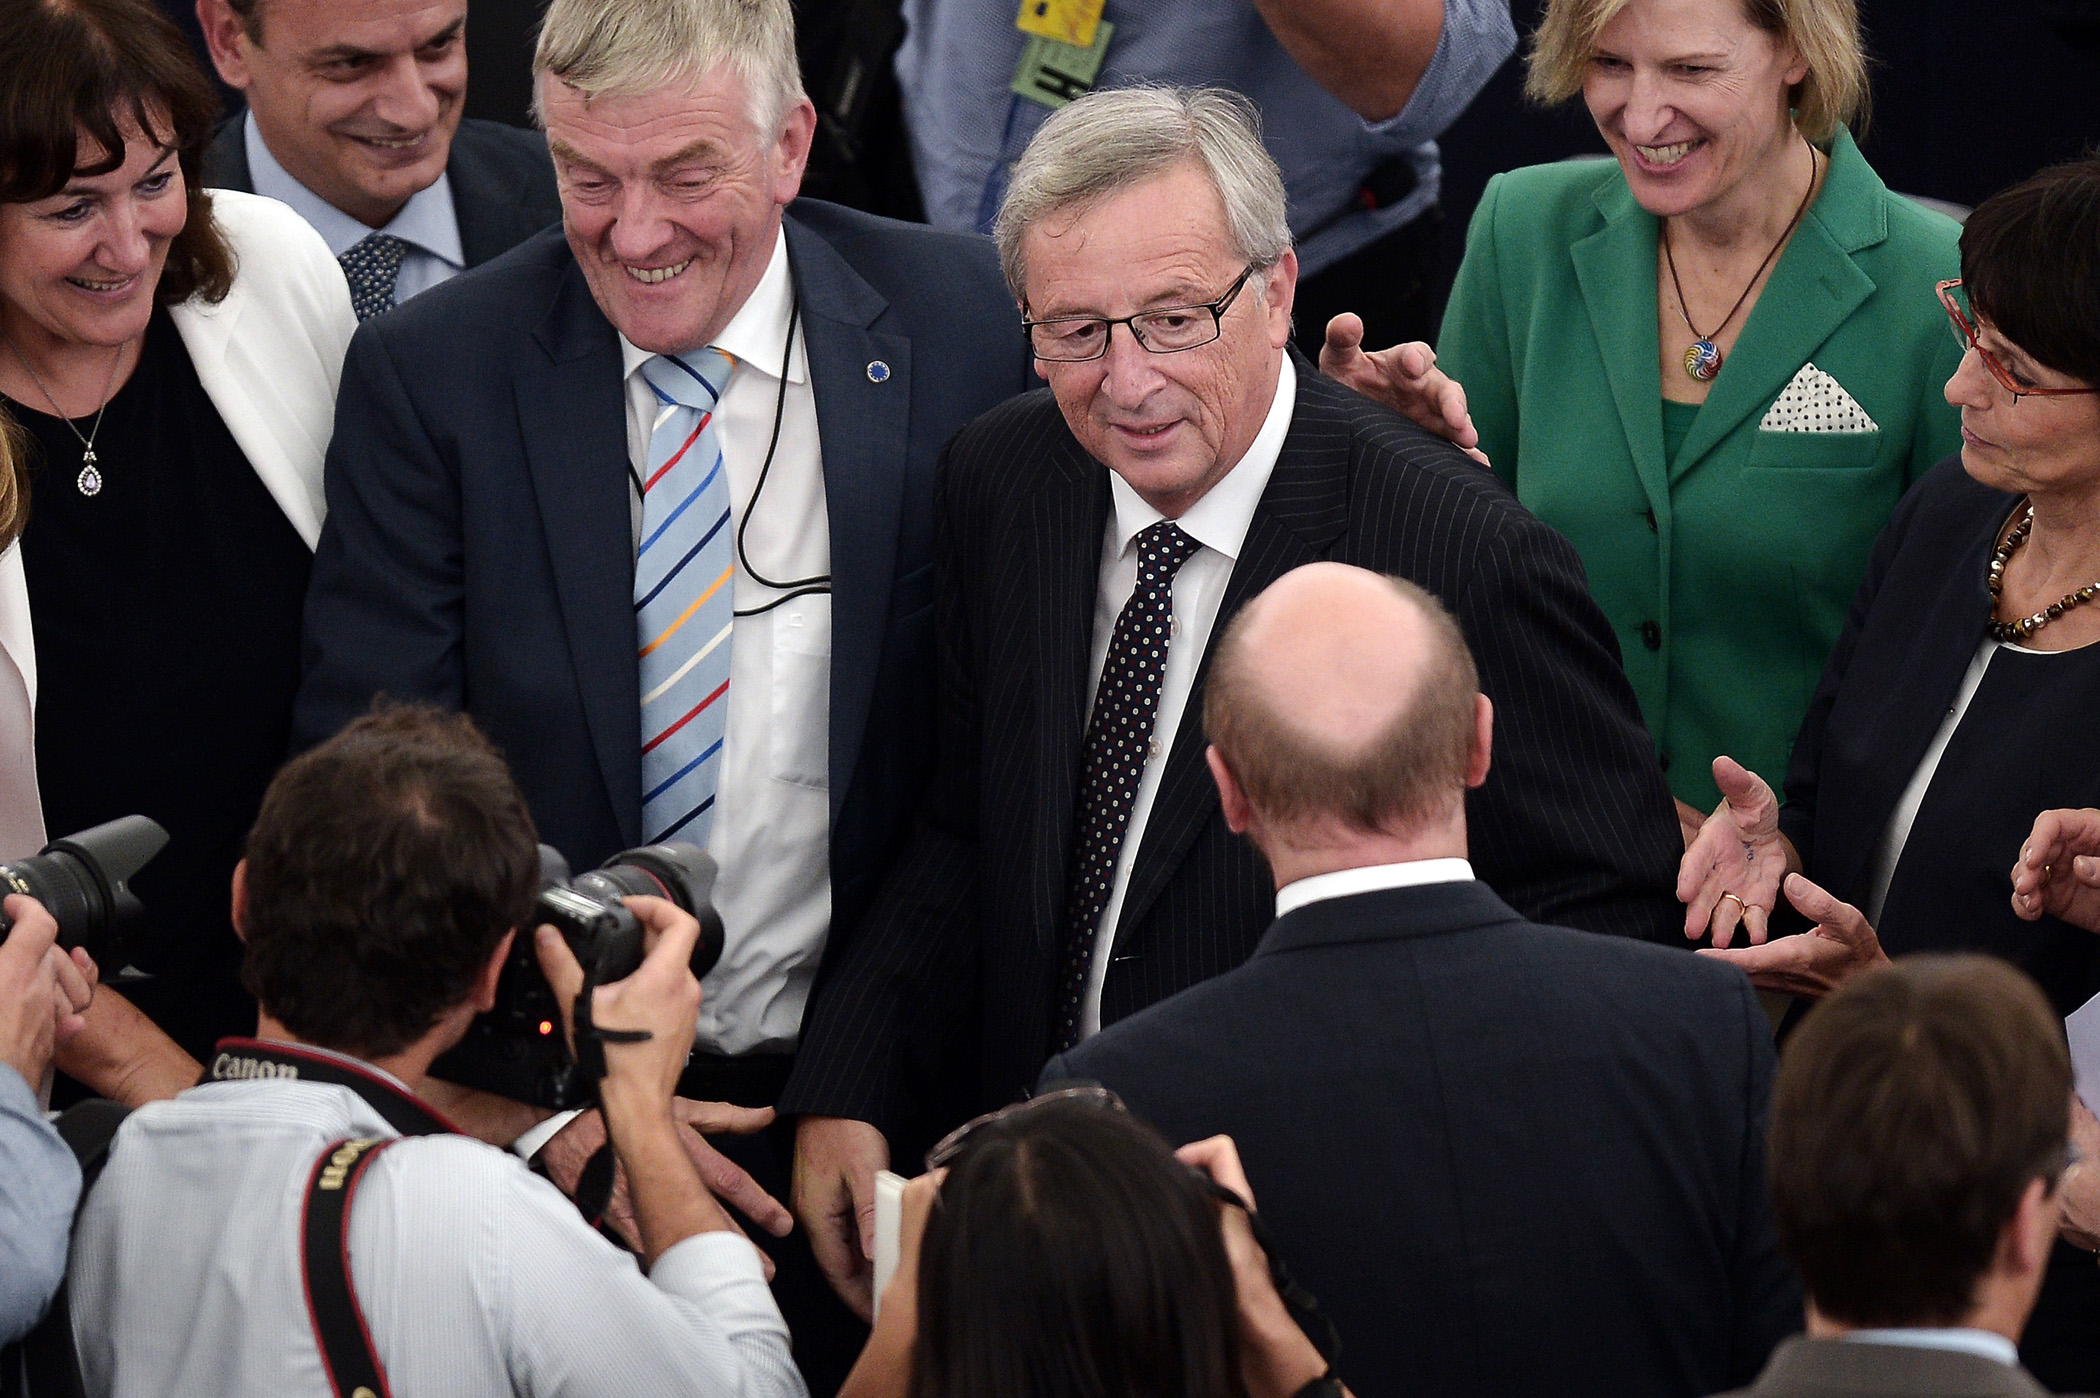 Newly elected President of the European Commission, Jean-Claude Juncker is congratulated on July 15, 2014, in the European Parliament in Strasbourg, France.